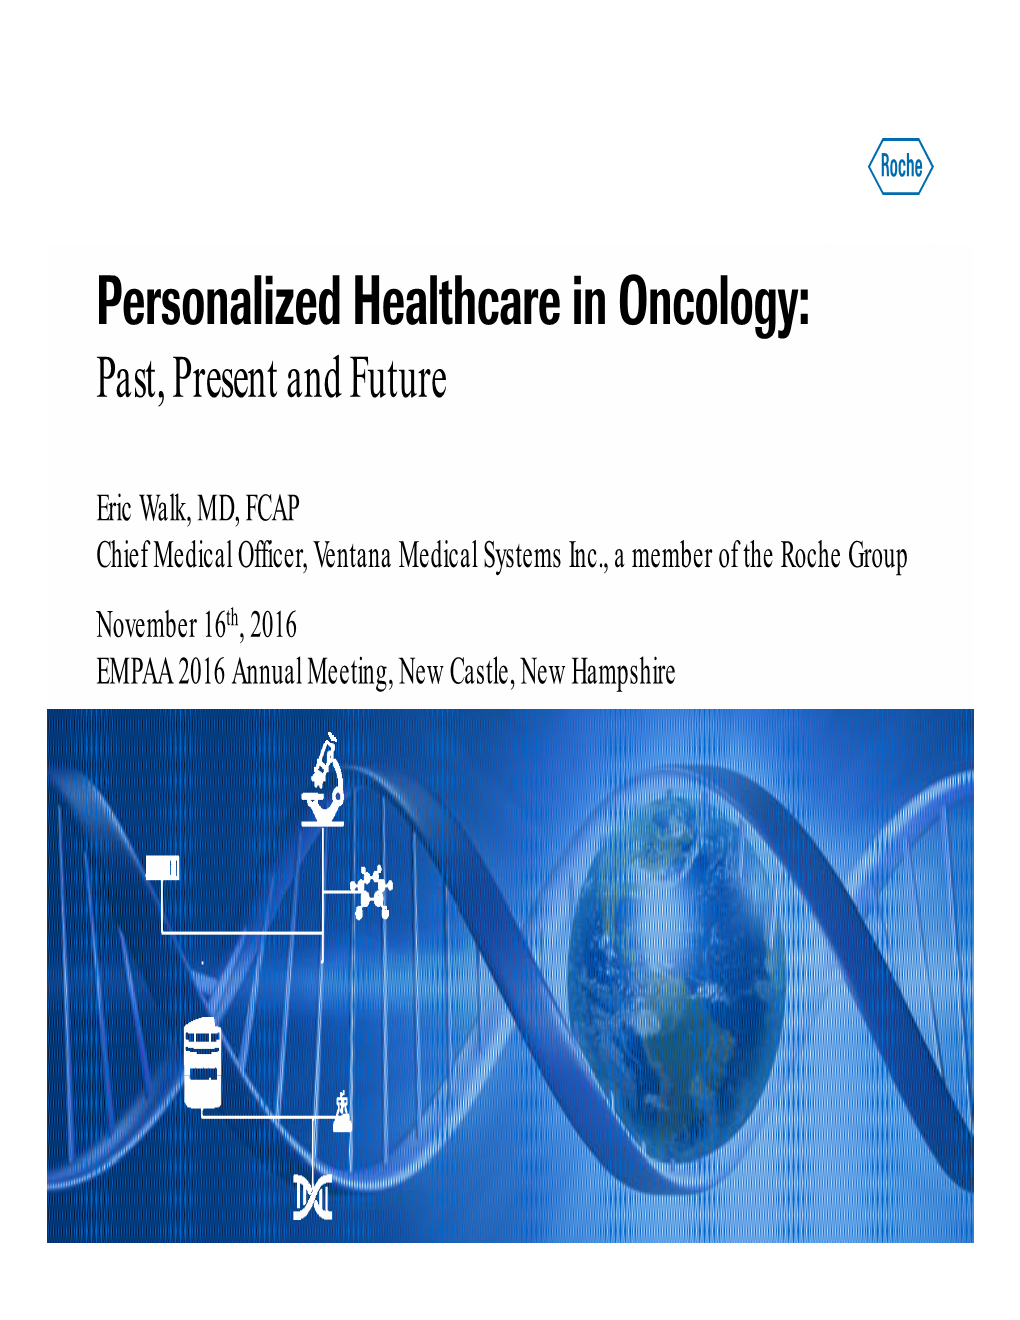 Personalized Healthcare in Oncology: Past, Present and Future